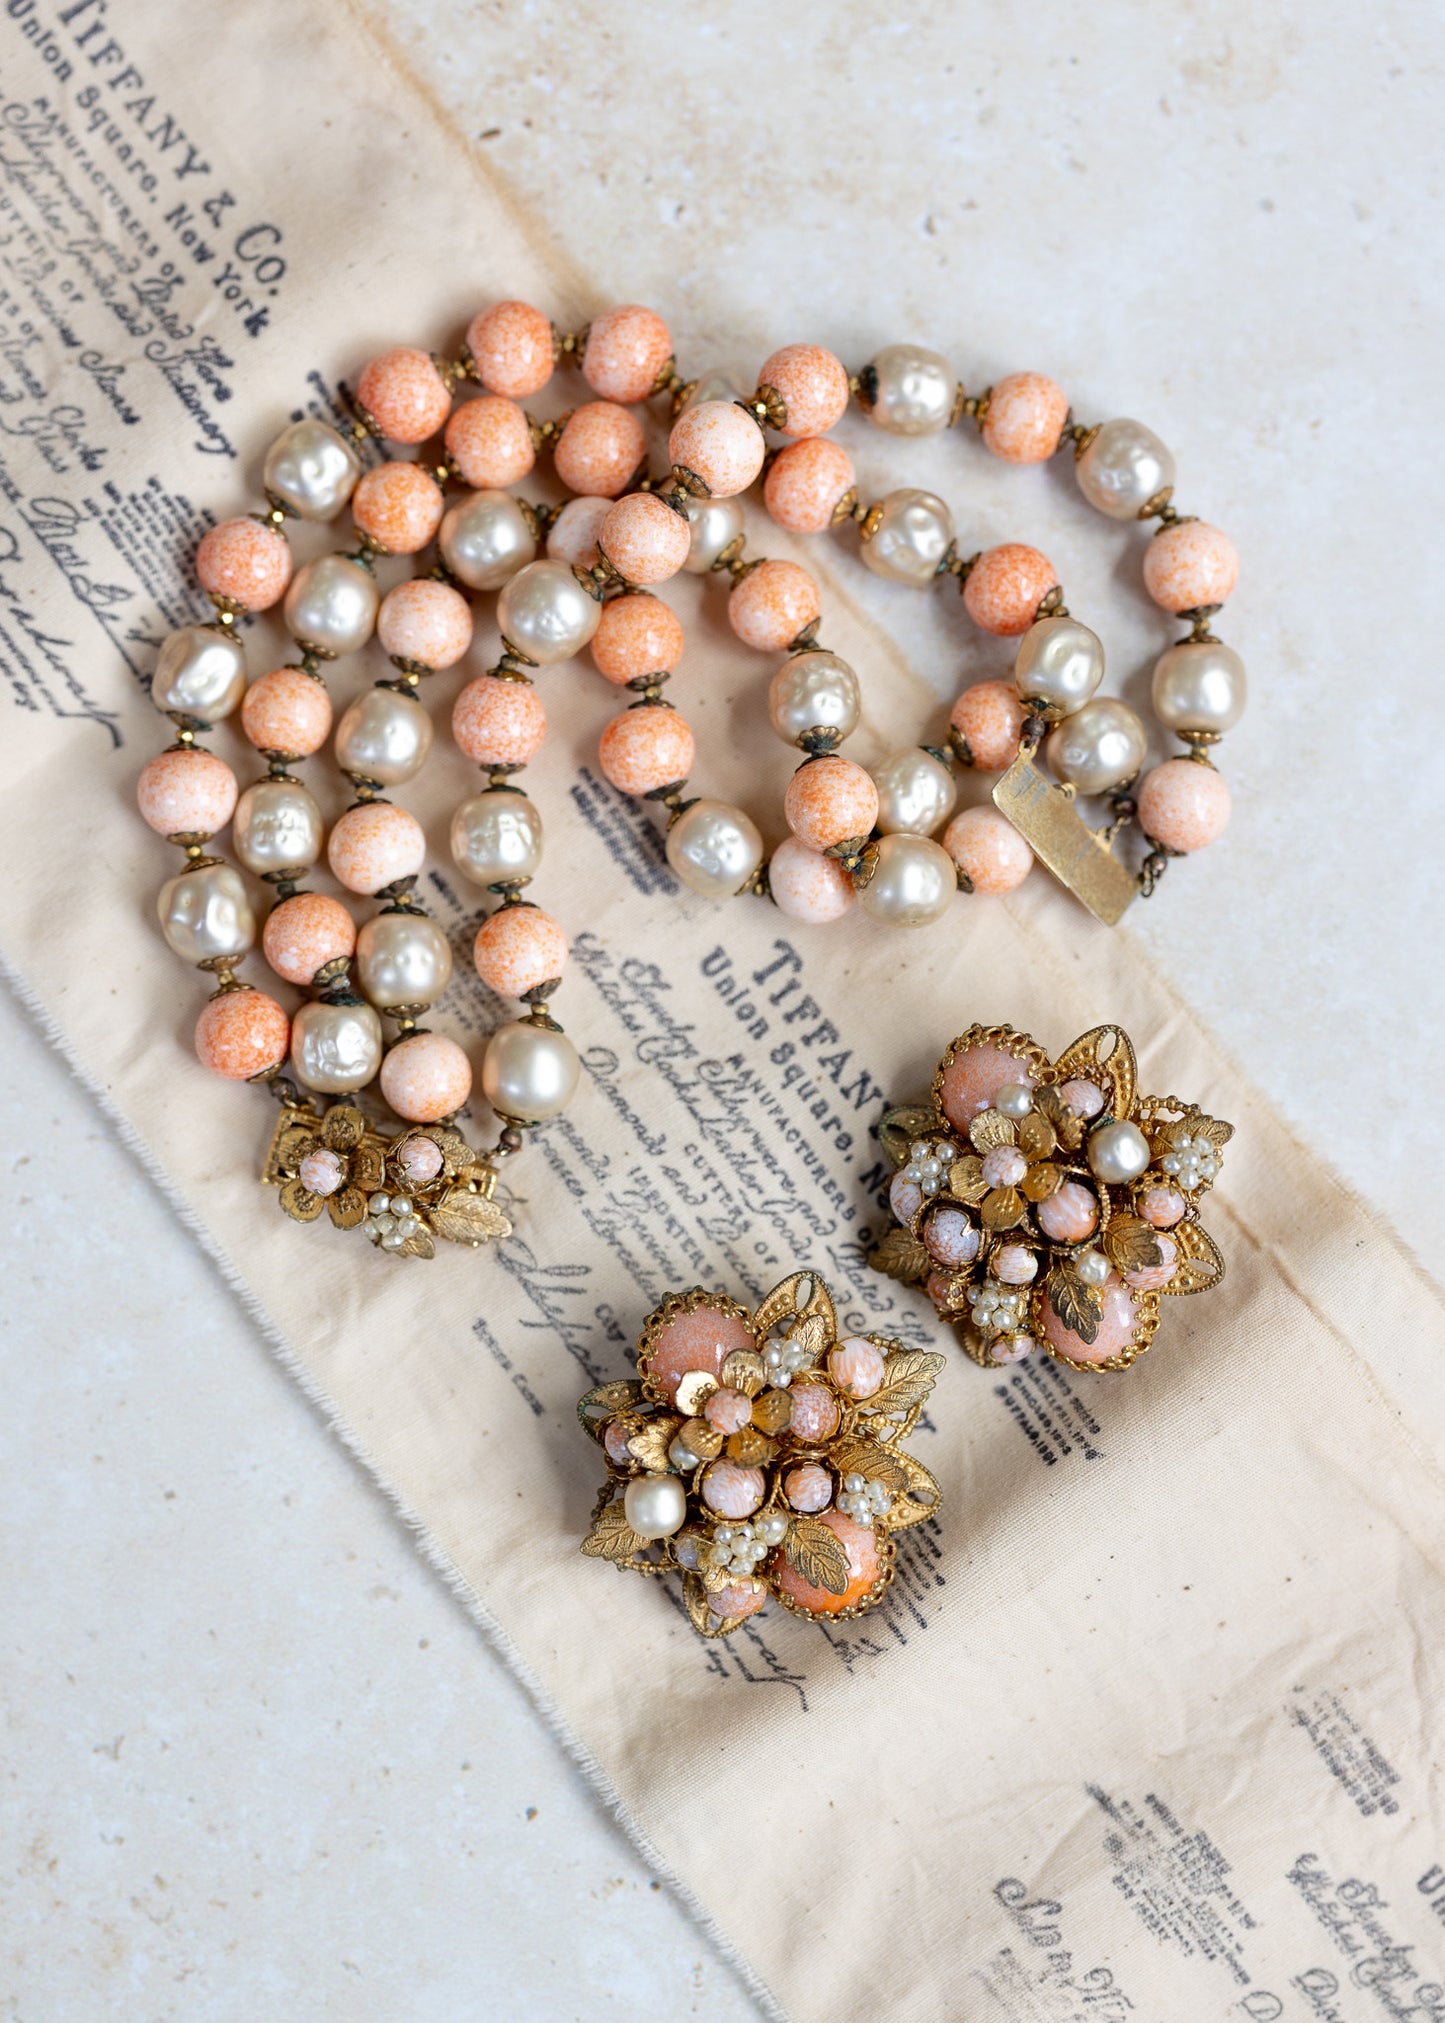 DeMario NY Signed Bracelet with Peach Colored Baroque Pearls and Ornate Clasp